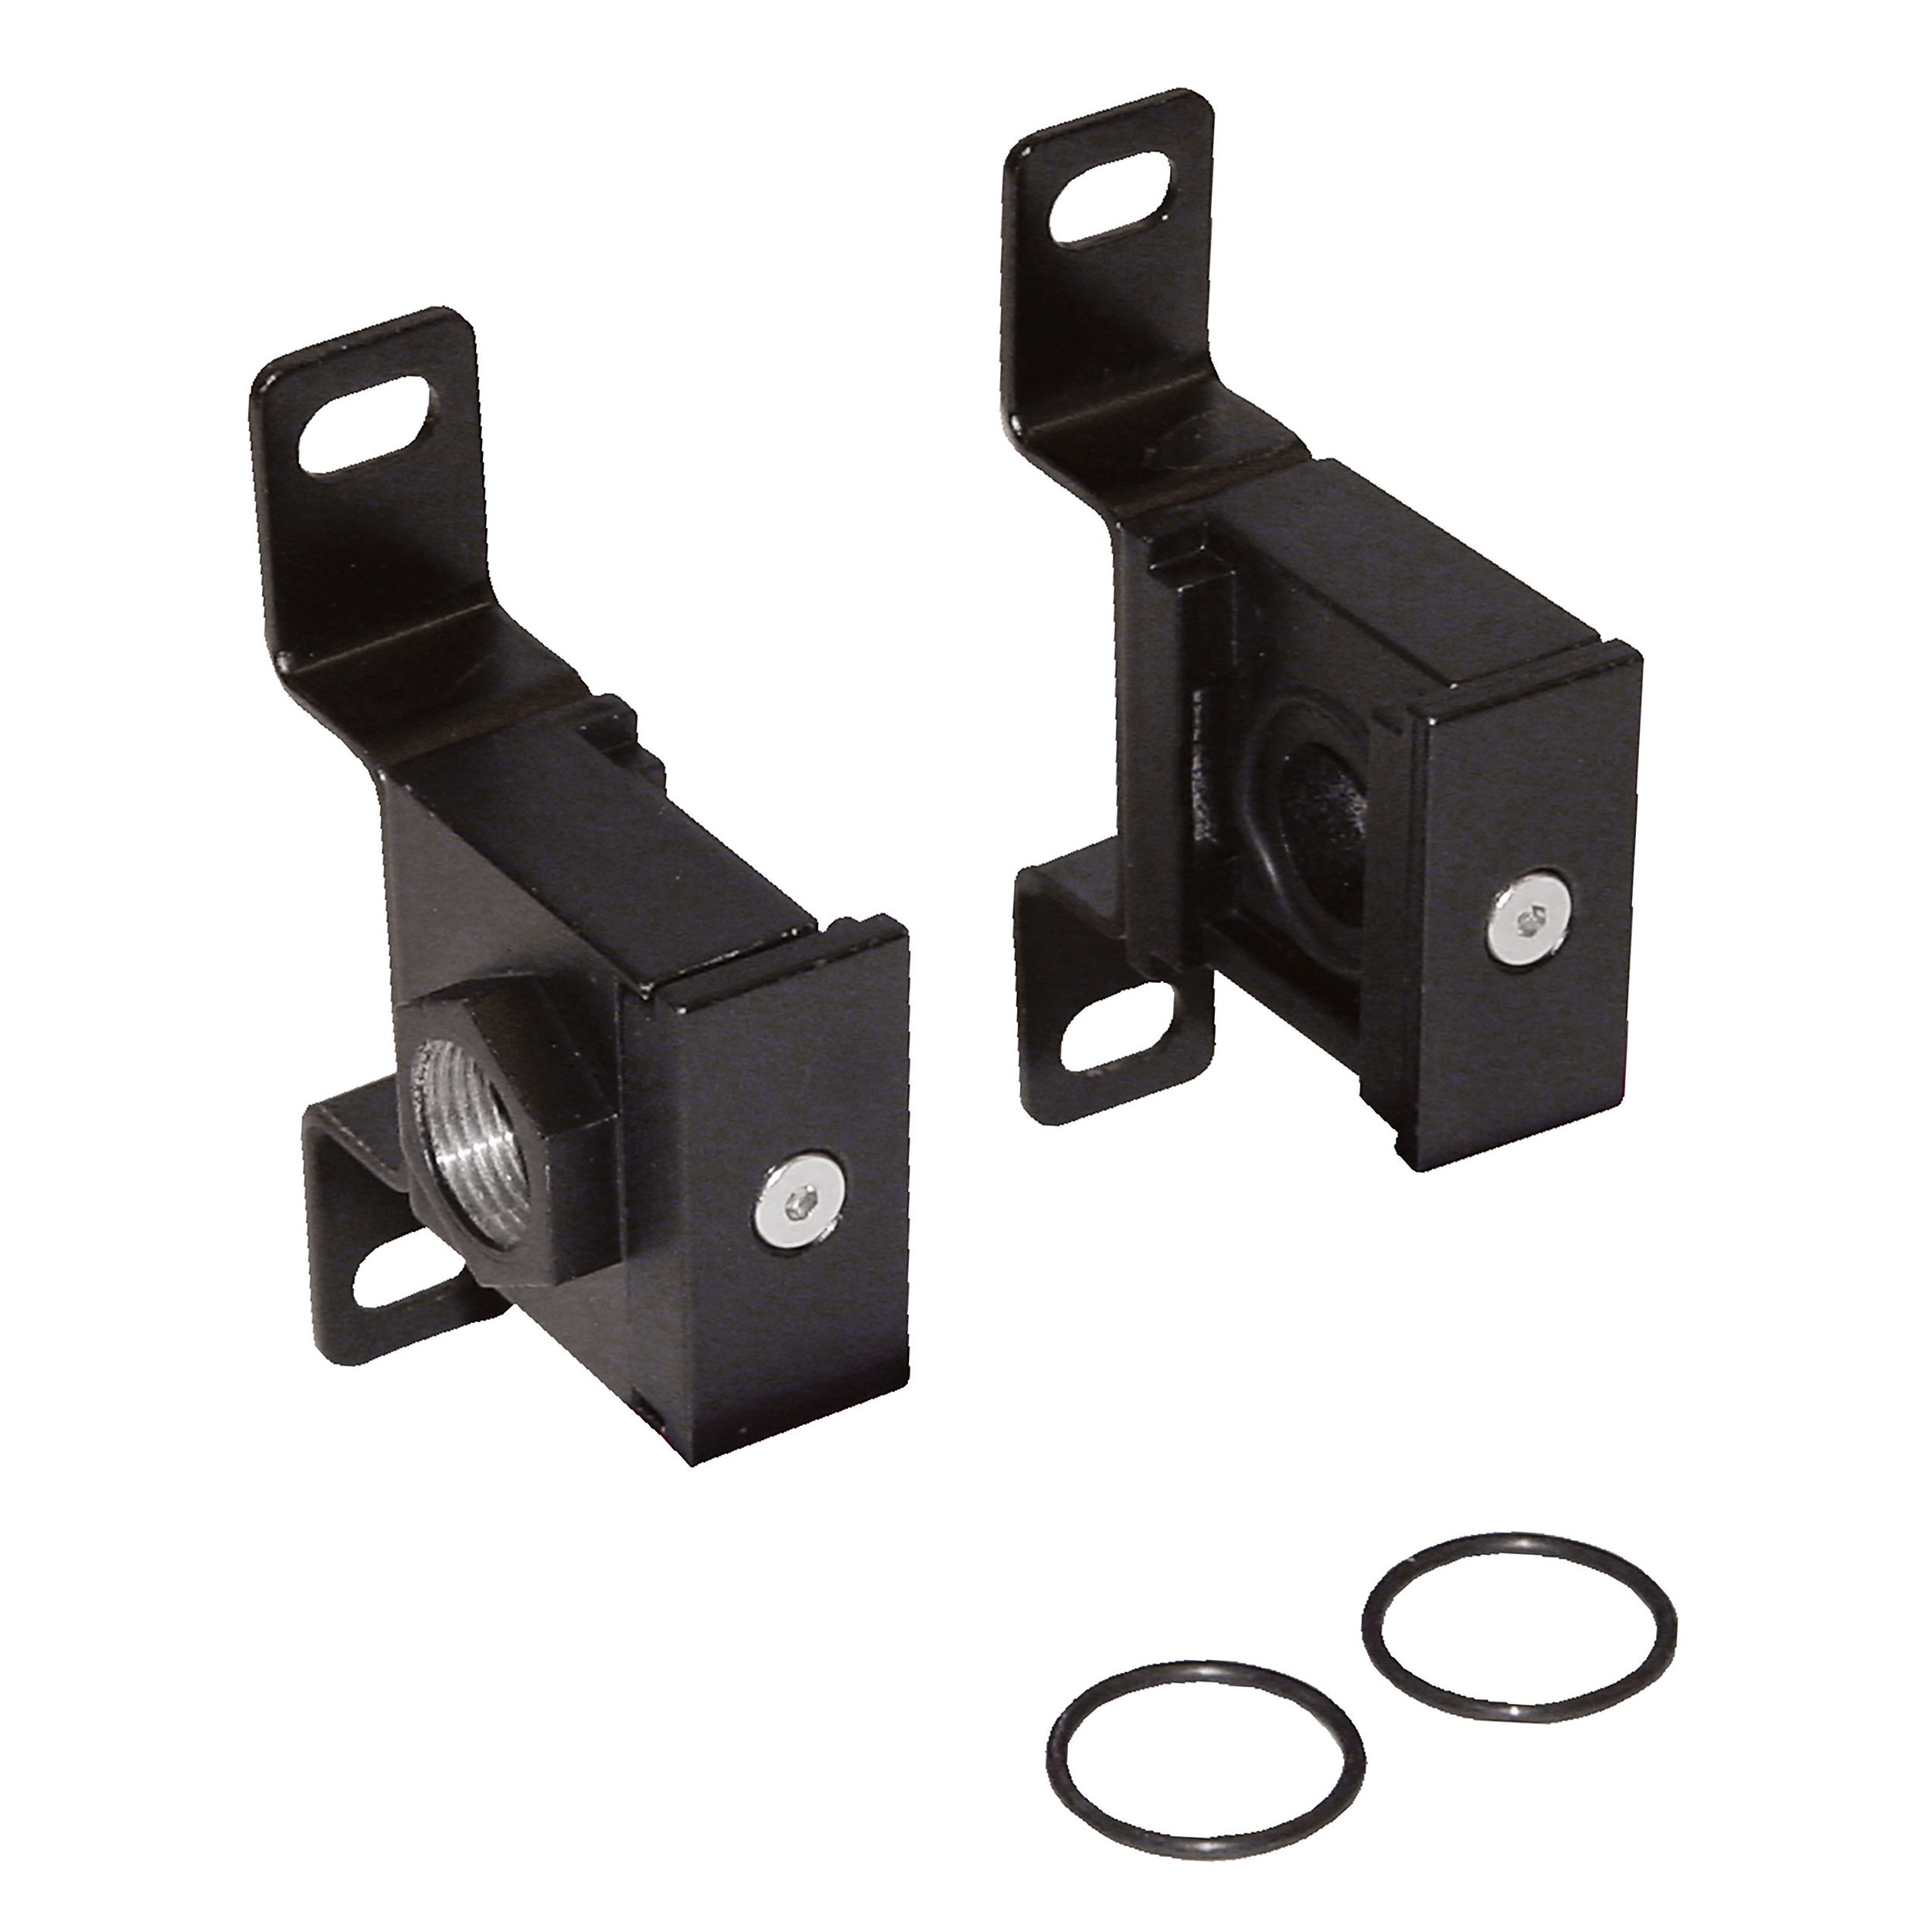 Threaded connection plate set, series variobloc